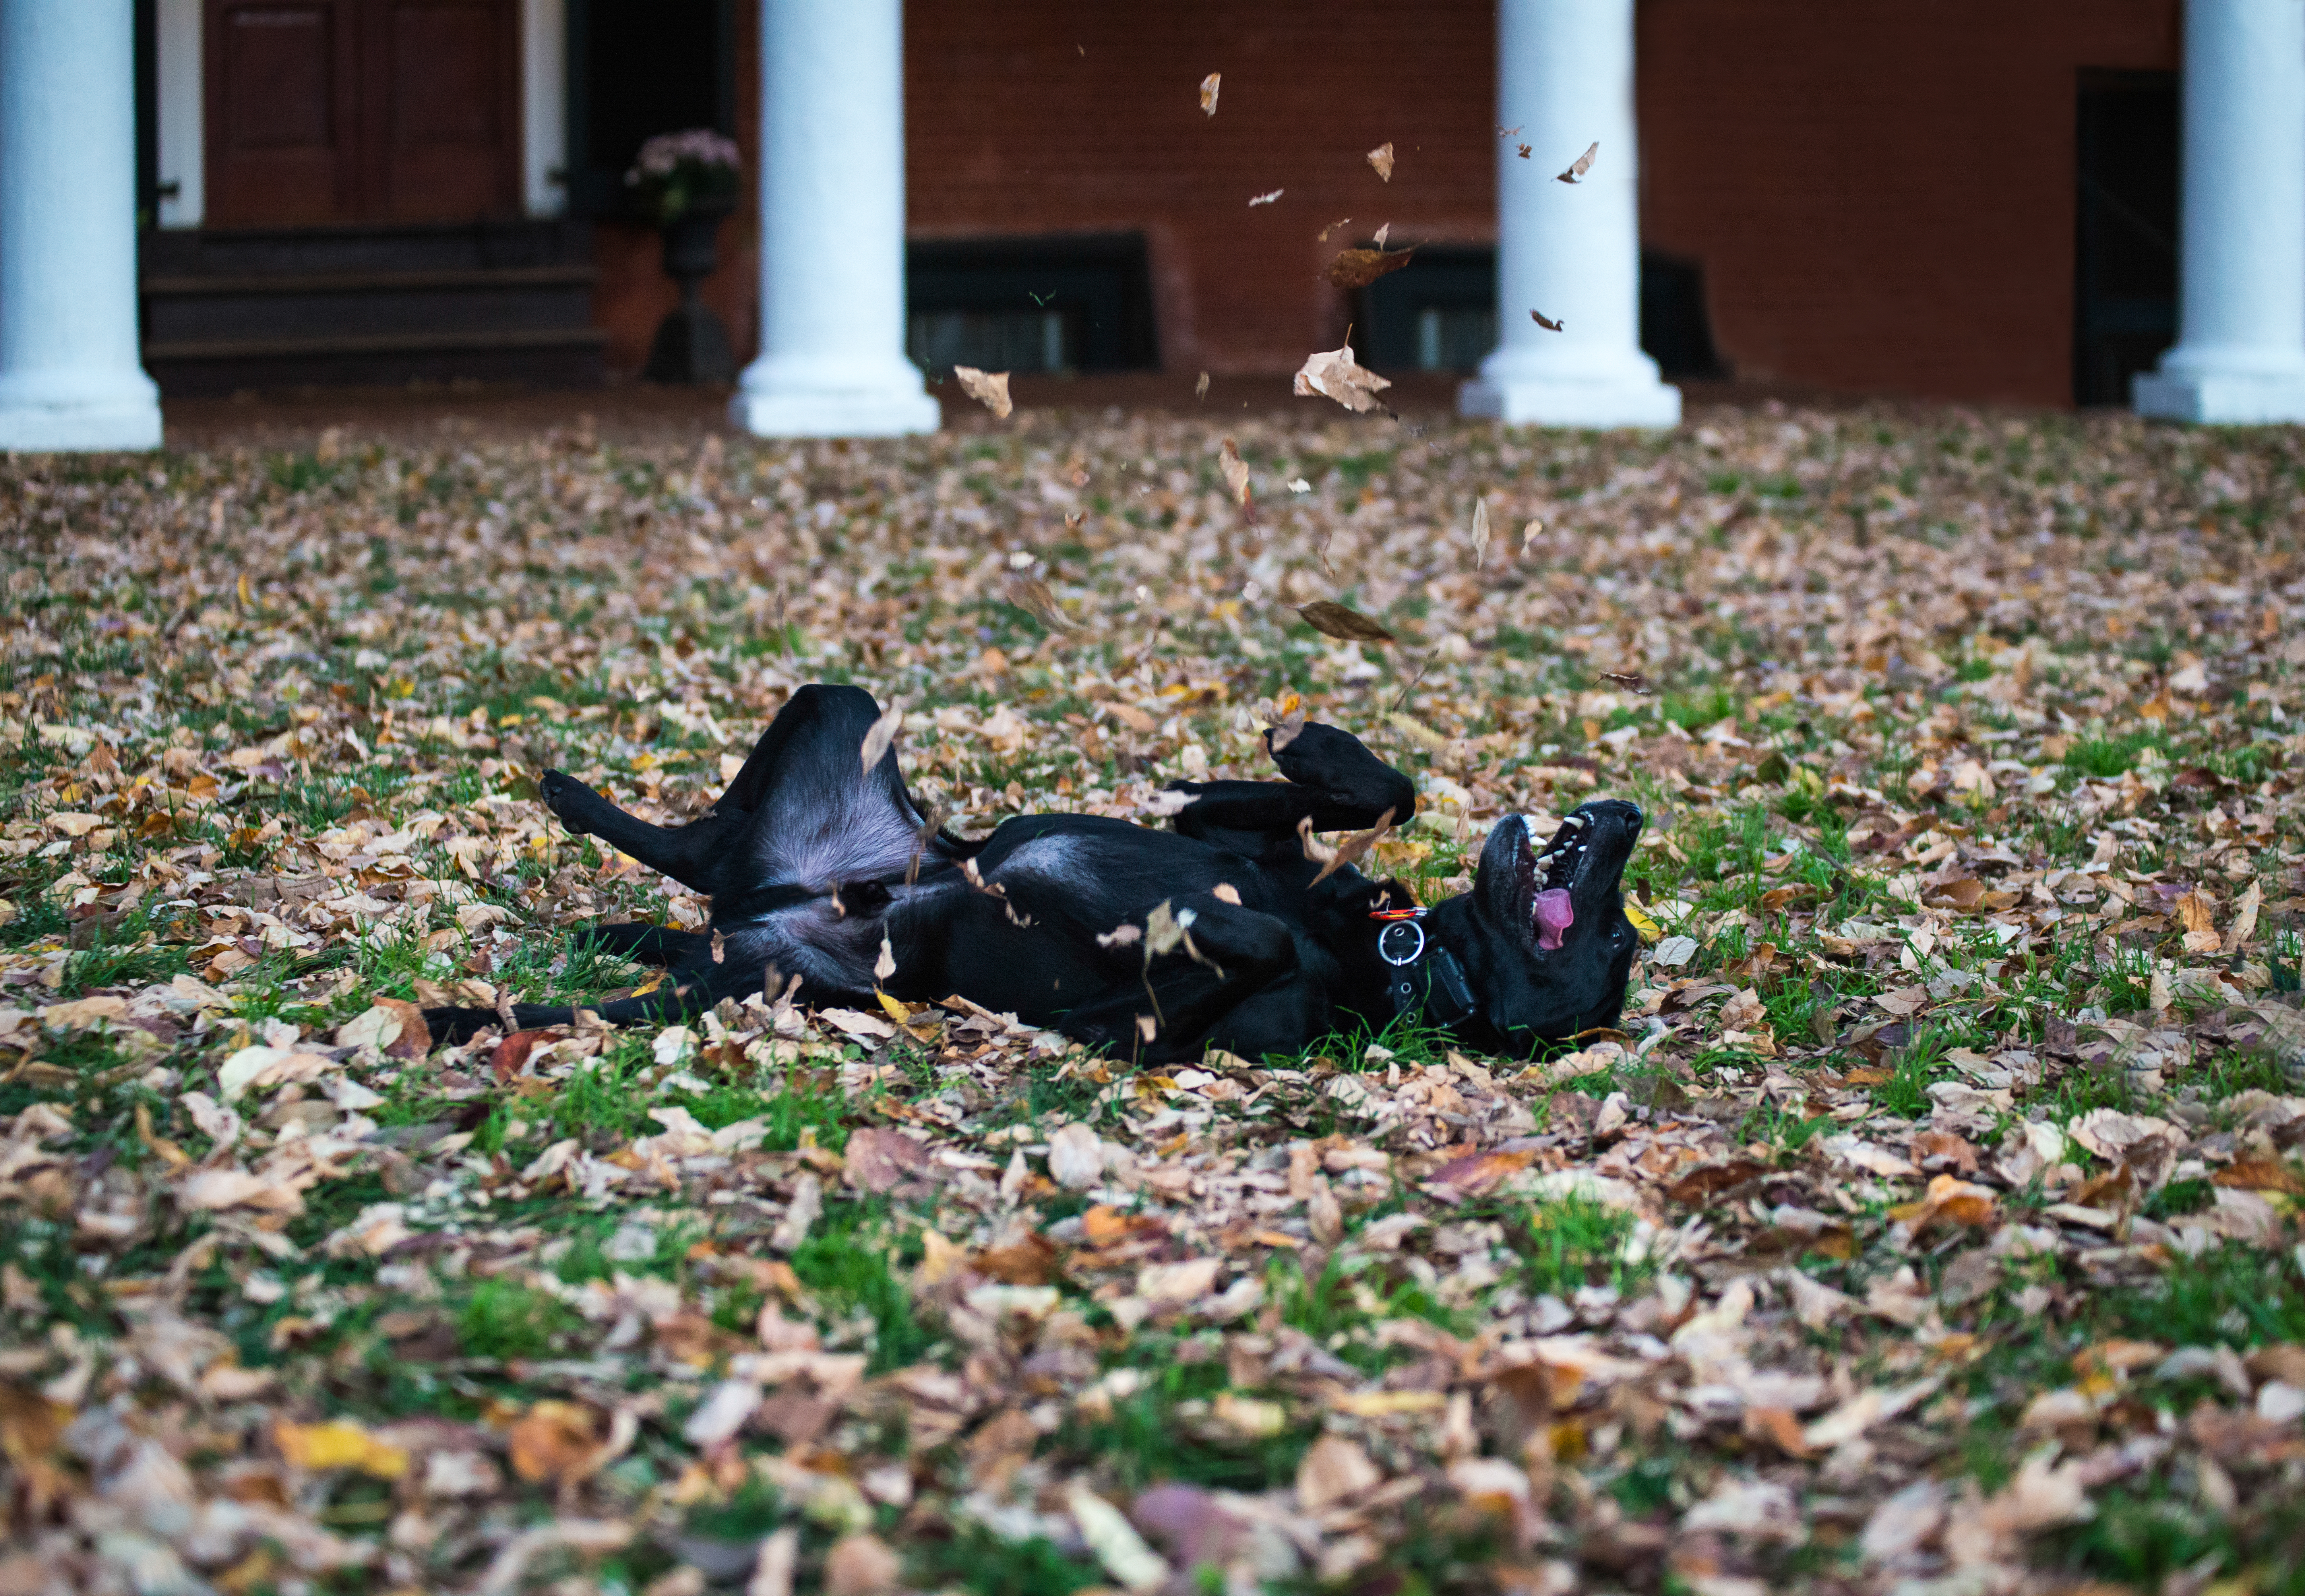 Dog rolling in leaves on the Lawn with leaves falling from the air on them.